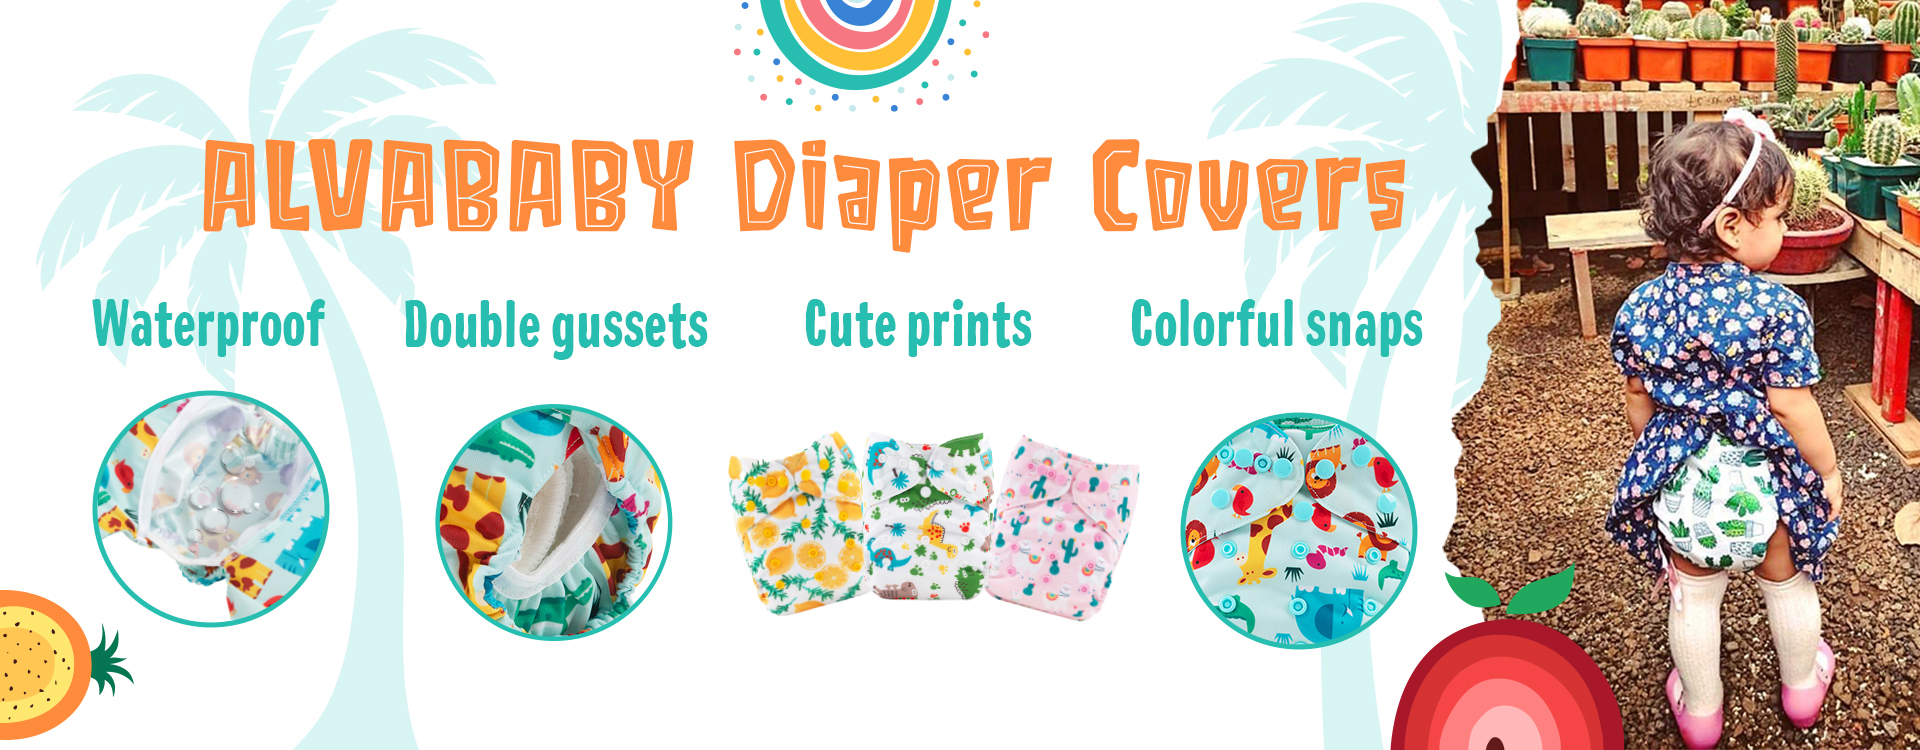 (All patterns) ALVABABY Reusable Cloth Diaper Covers with Double Gussets  One Size